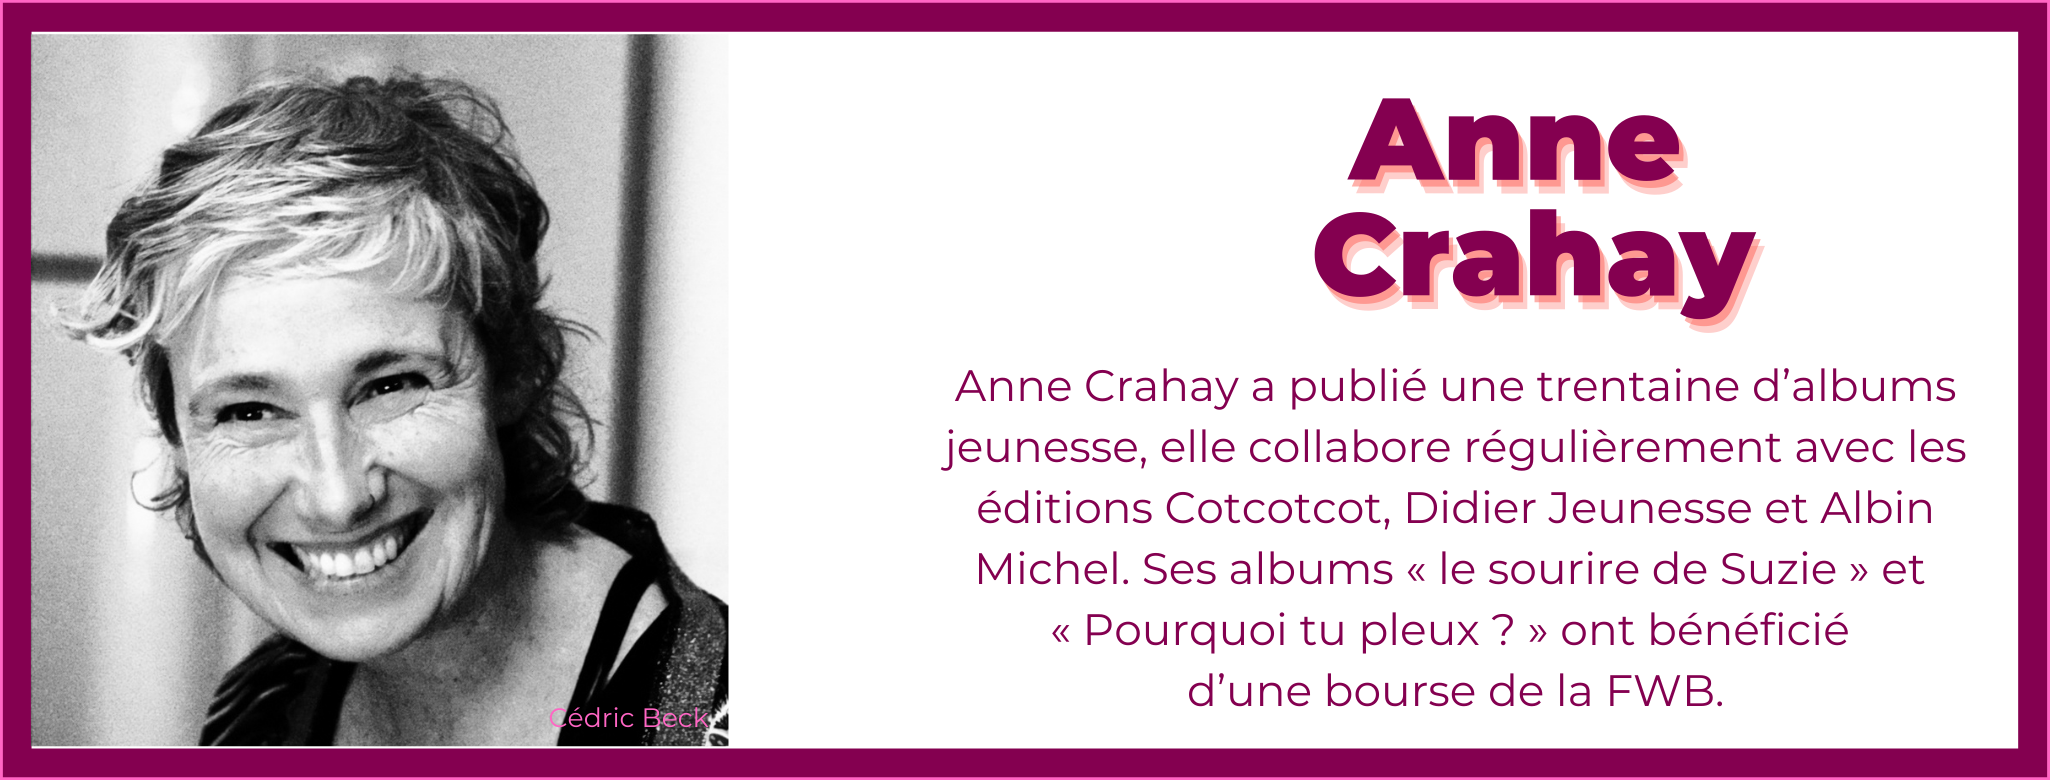 1. Anne Crahay